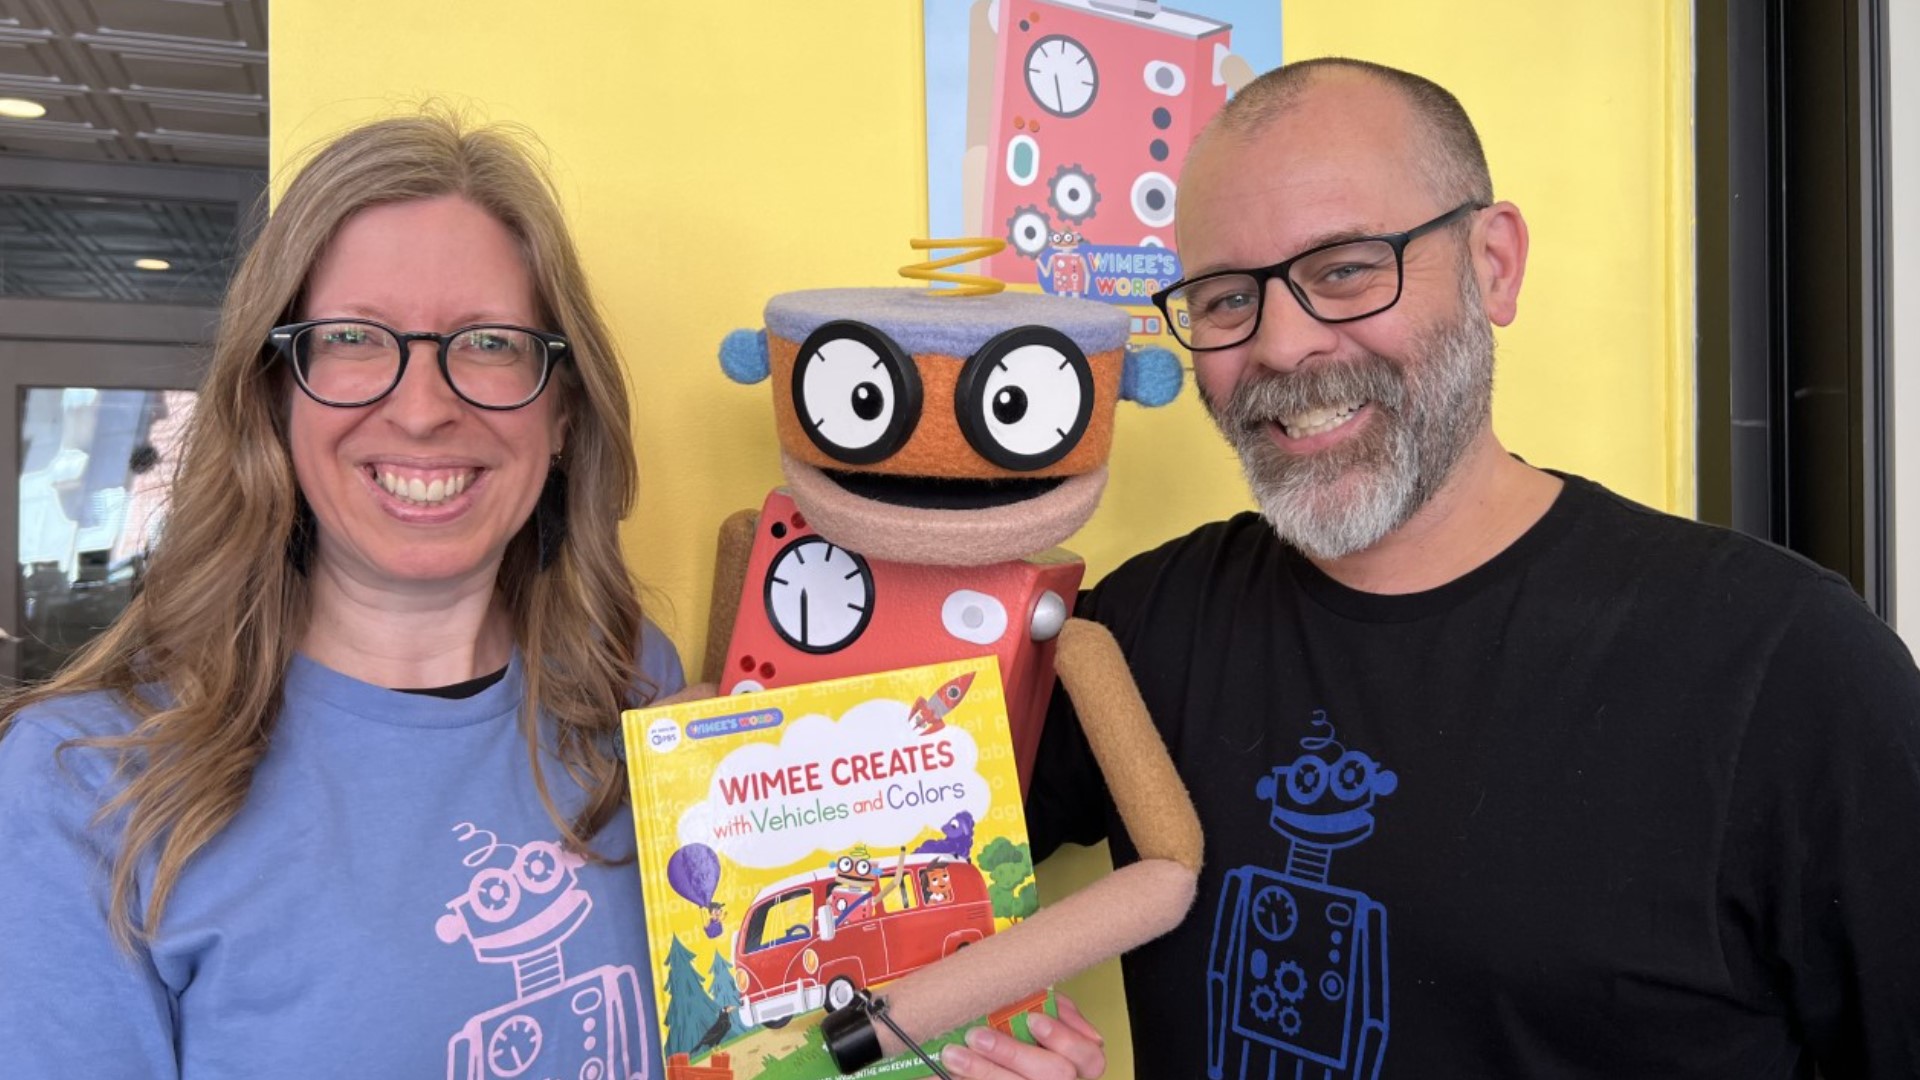 Wimee the Robot has his own books and television show aimed at promoting early literacy, and a new release from Wimee is coming soon.